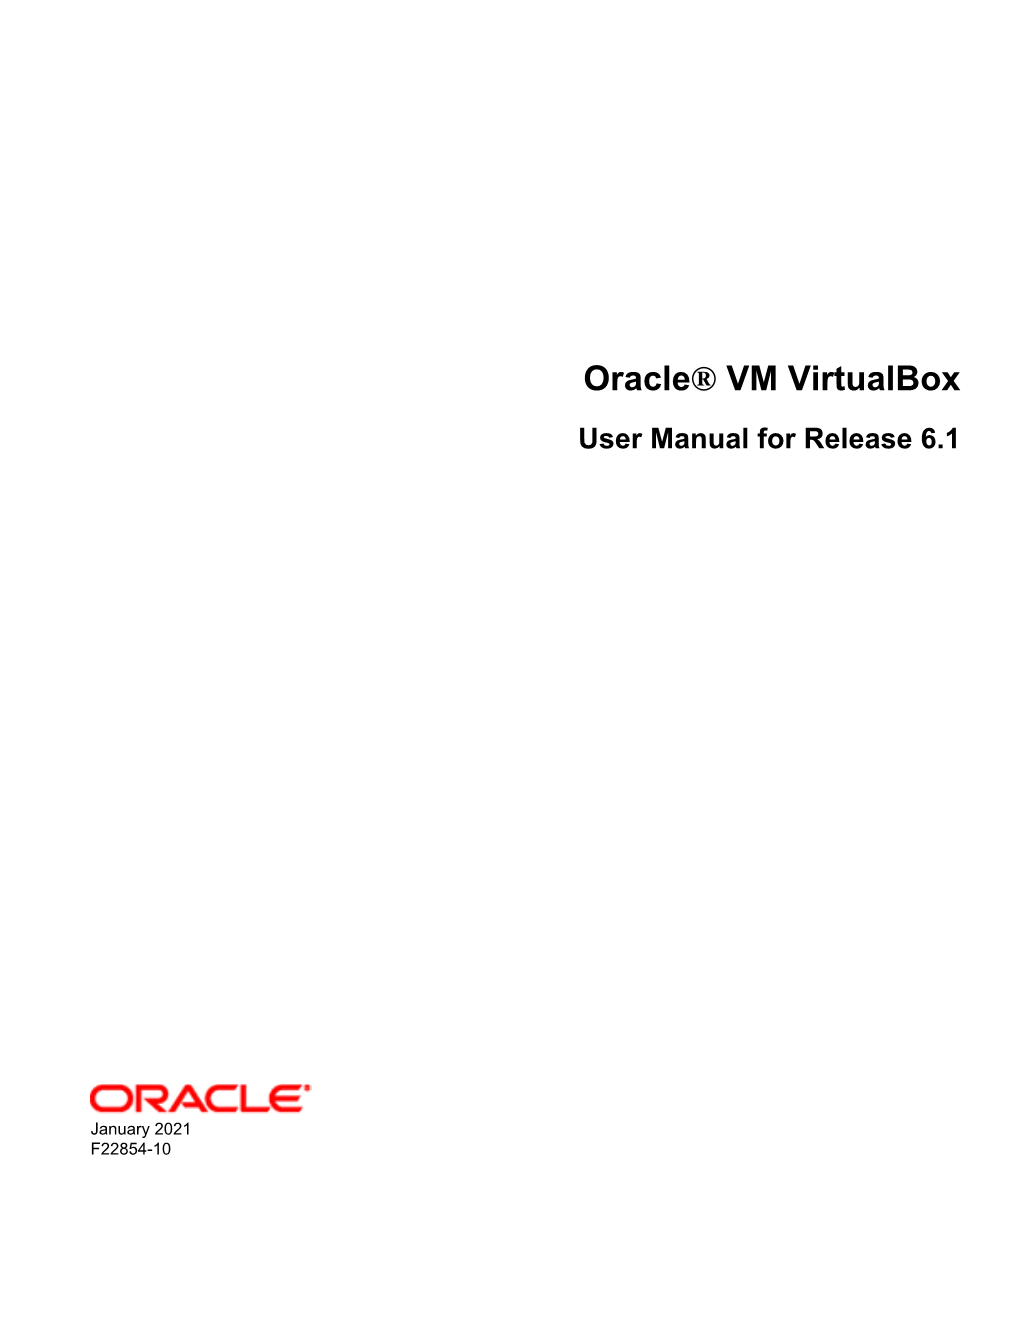 Oracle® VM Virtualbox User Manual for Release 6.1